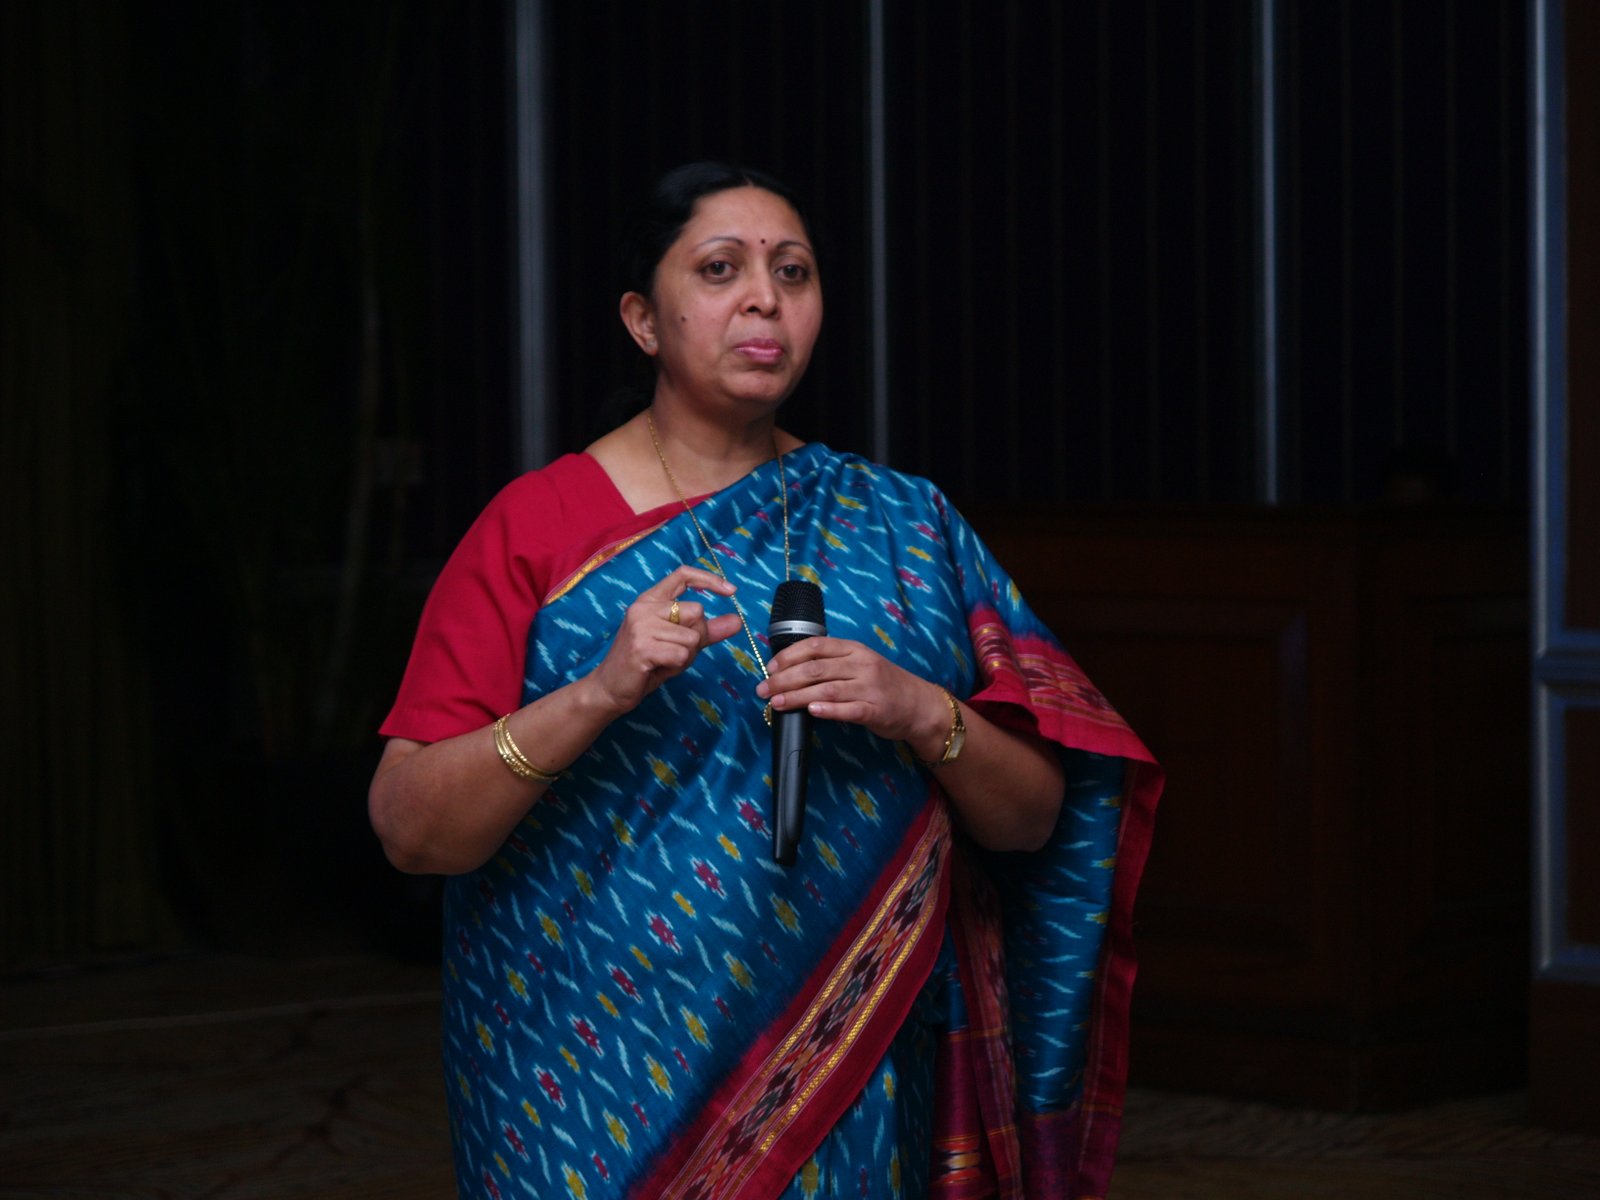 Dr Renu Swarup, managing director of Biotechnology Industry Research Assistance Council (BIRAC) (File Photo)